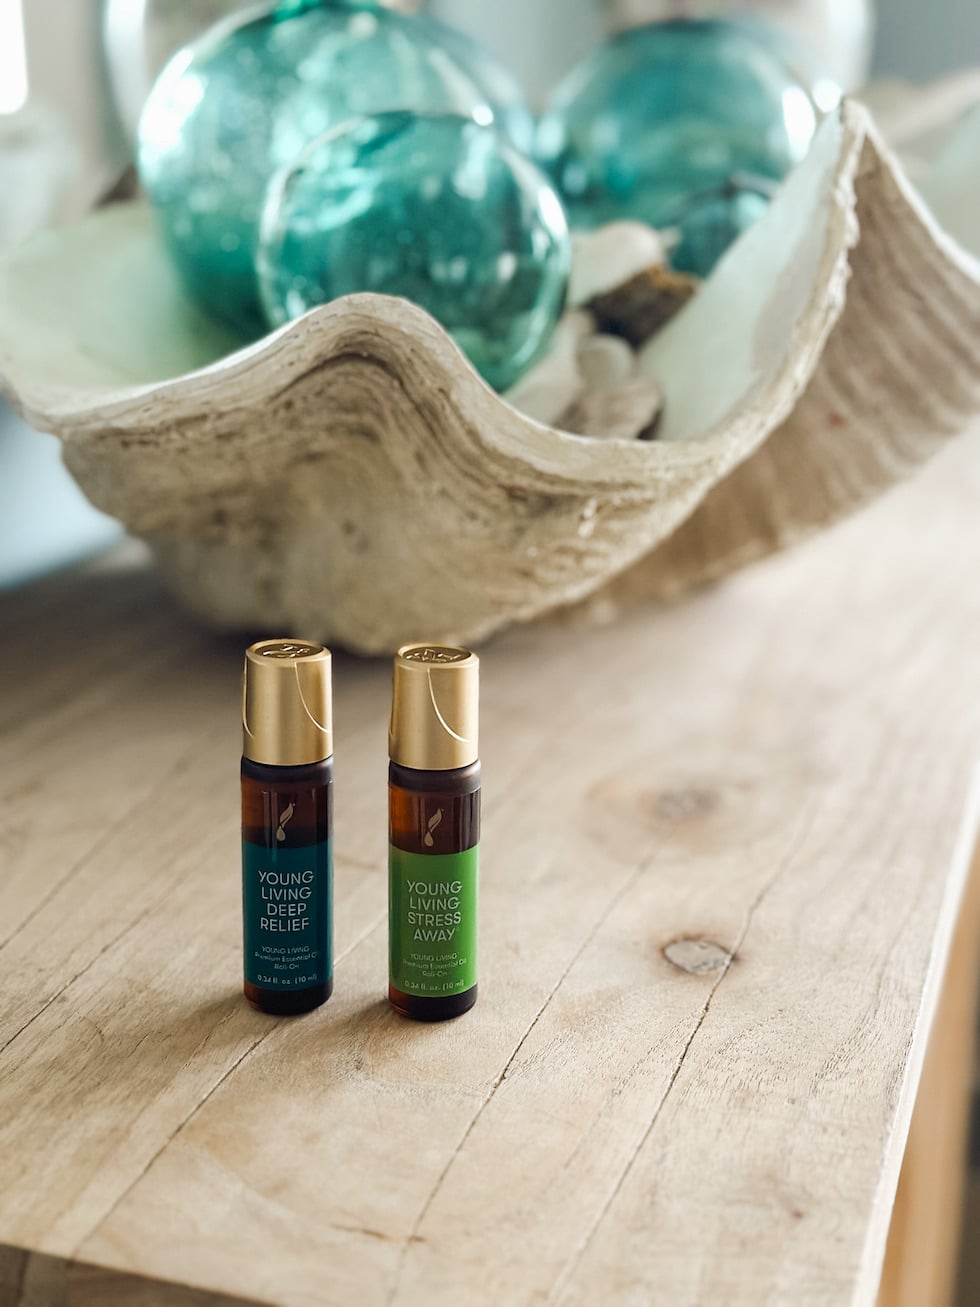 How to Create Your Own Signature Seasonal Scents with Essential Oils